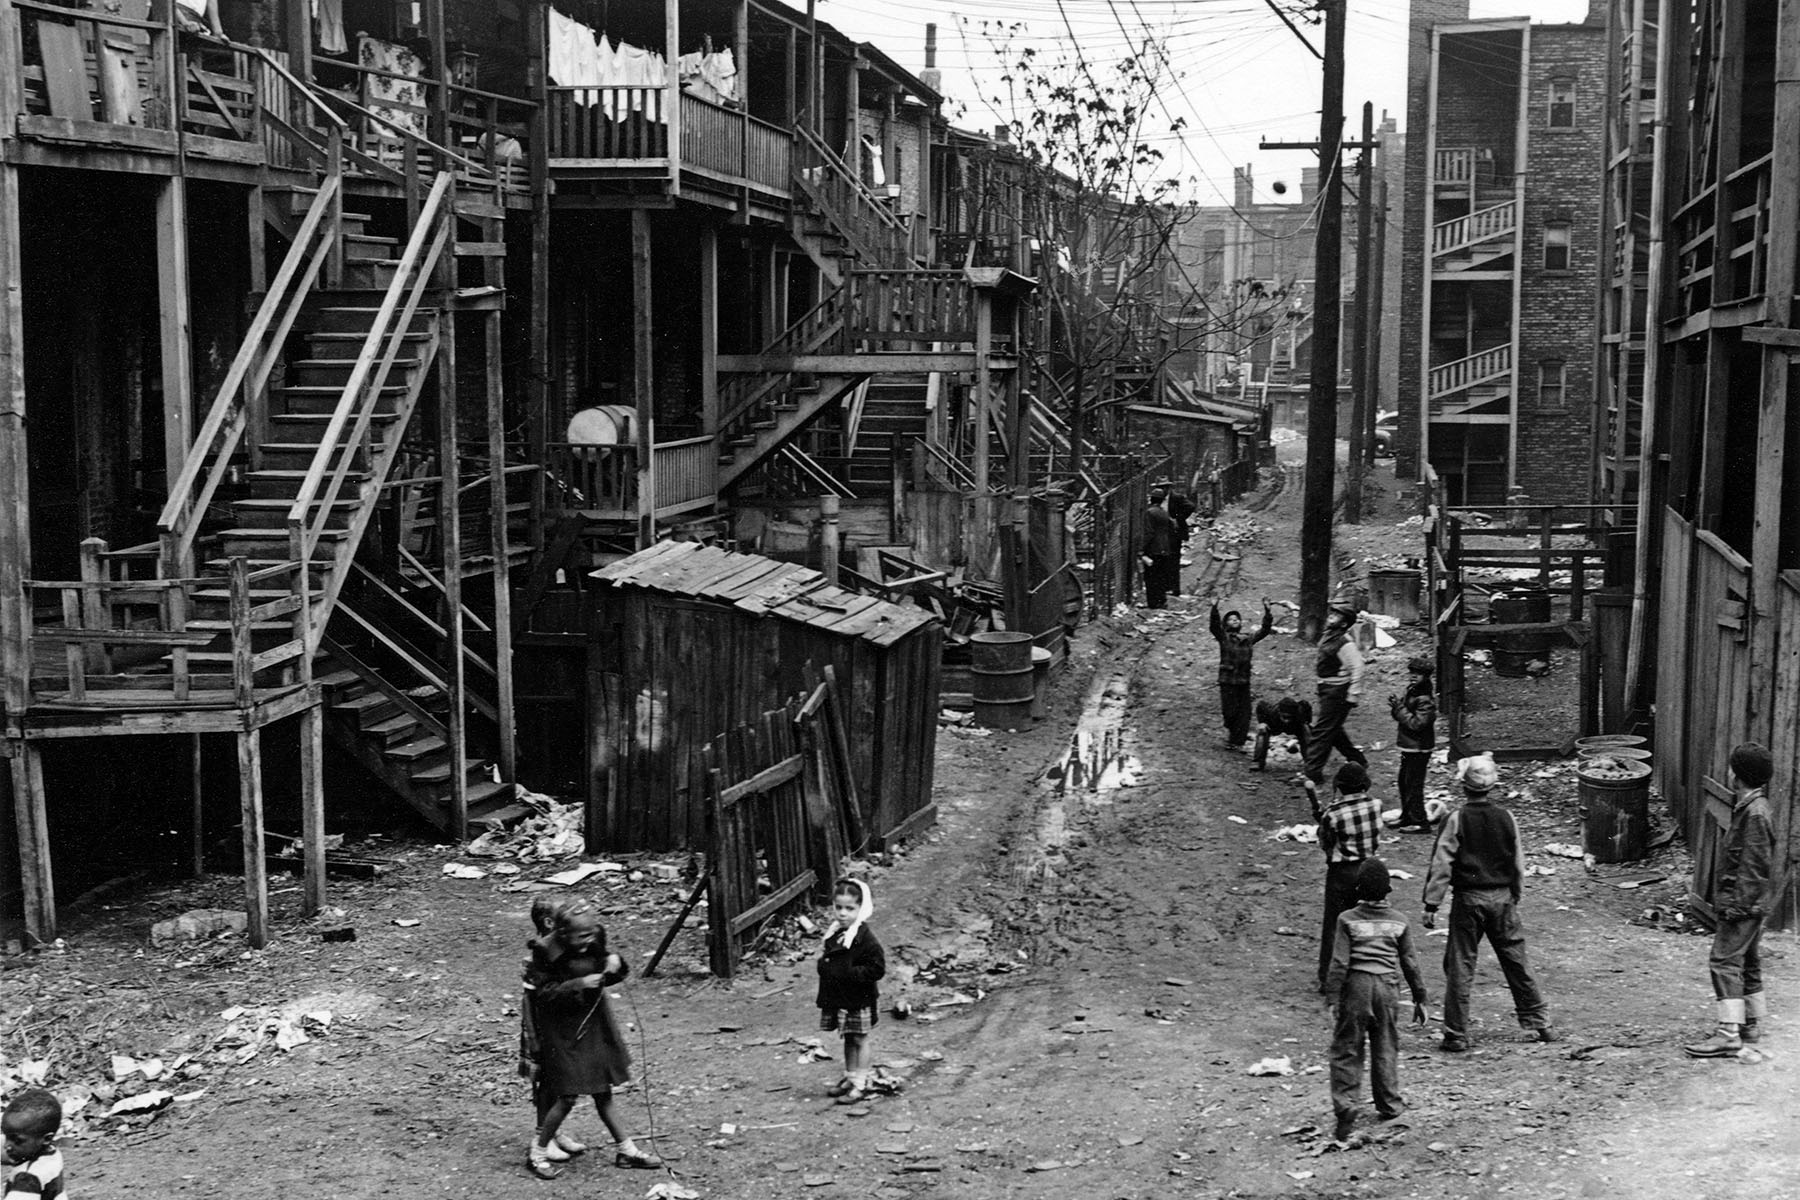 Children play in a muddy back street alley of Chicago's South Side in 1951.